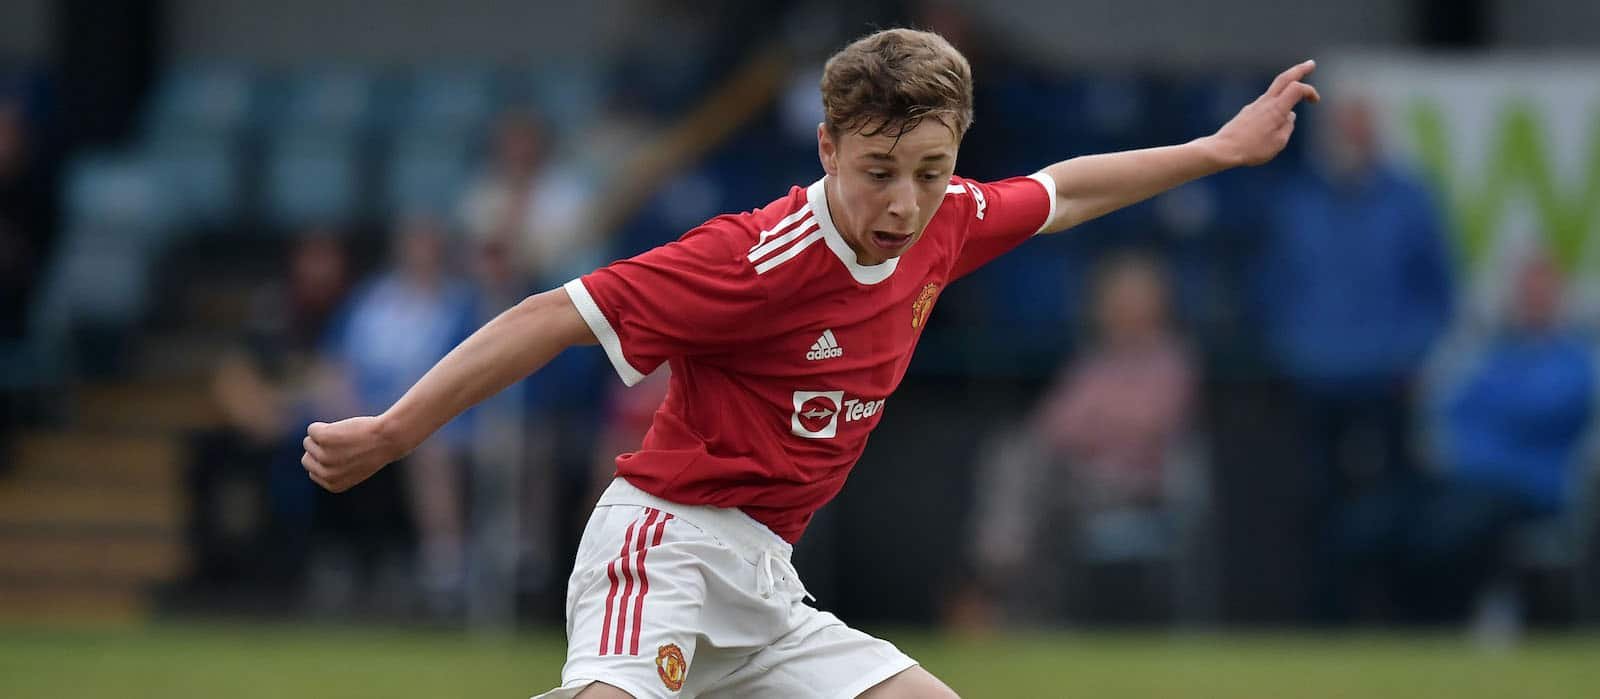 Amir Ibragimov is the most exciting prospect Manchester United have had in years – Man United News And Transfer News